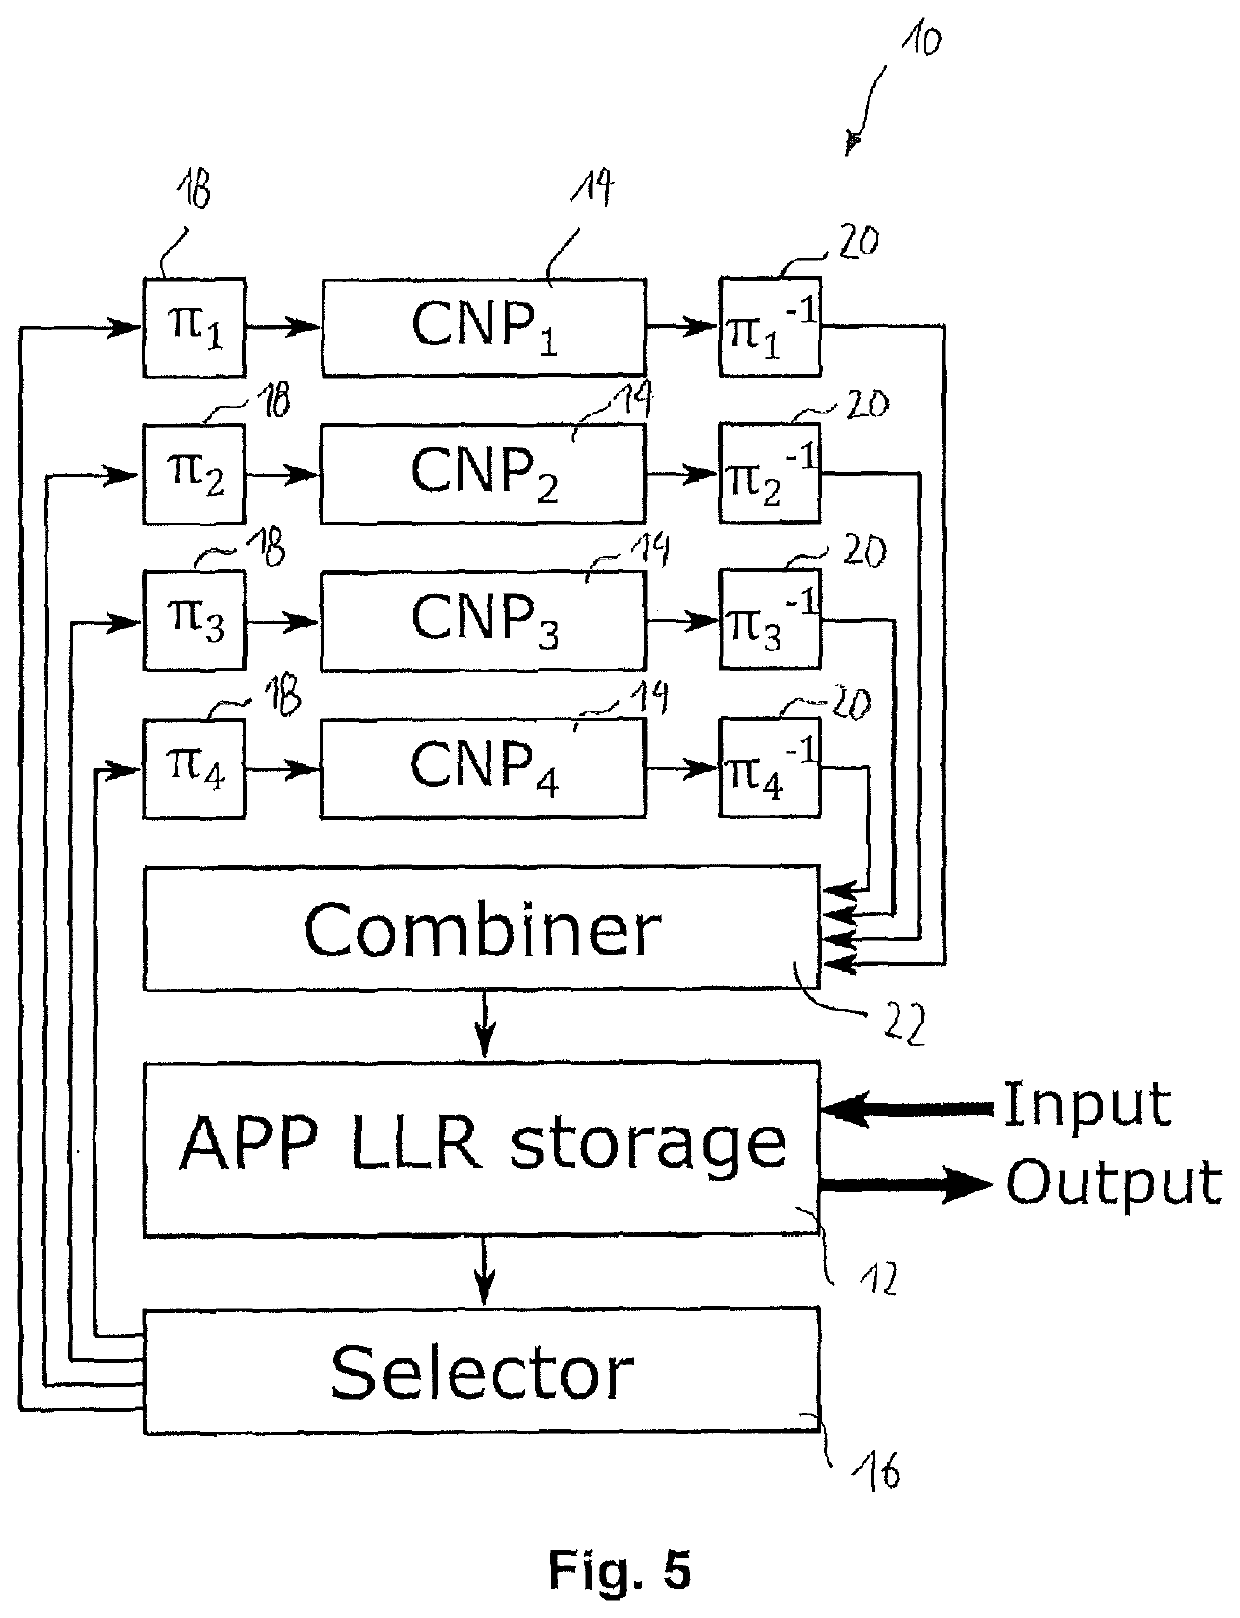 Decoder for a family of rate compatible low-density parity check (LDPC) codes